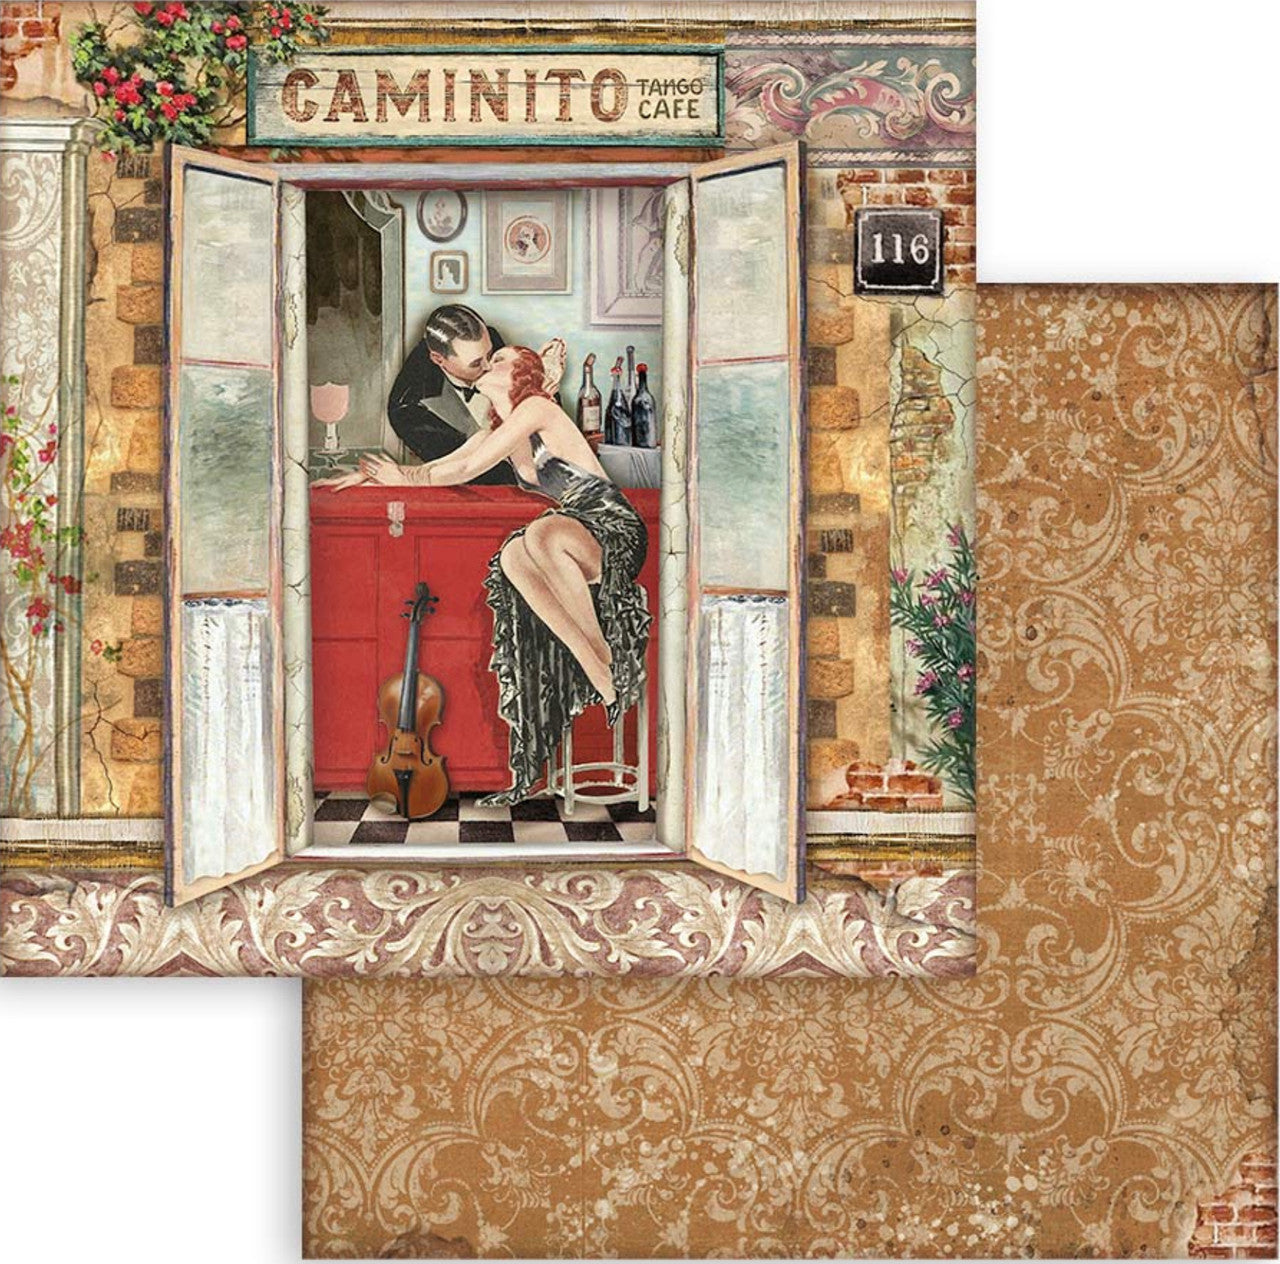 Stamperia Desire 12” x 12” Paper Collection